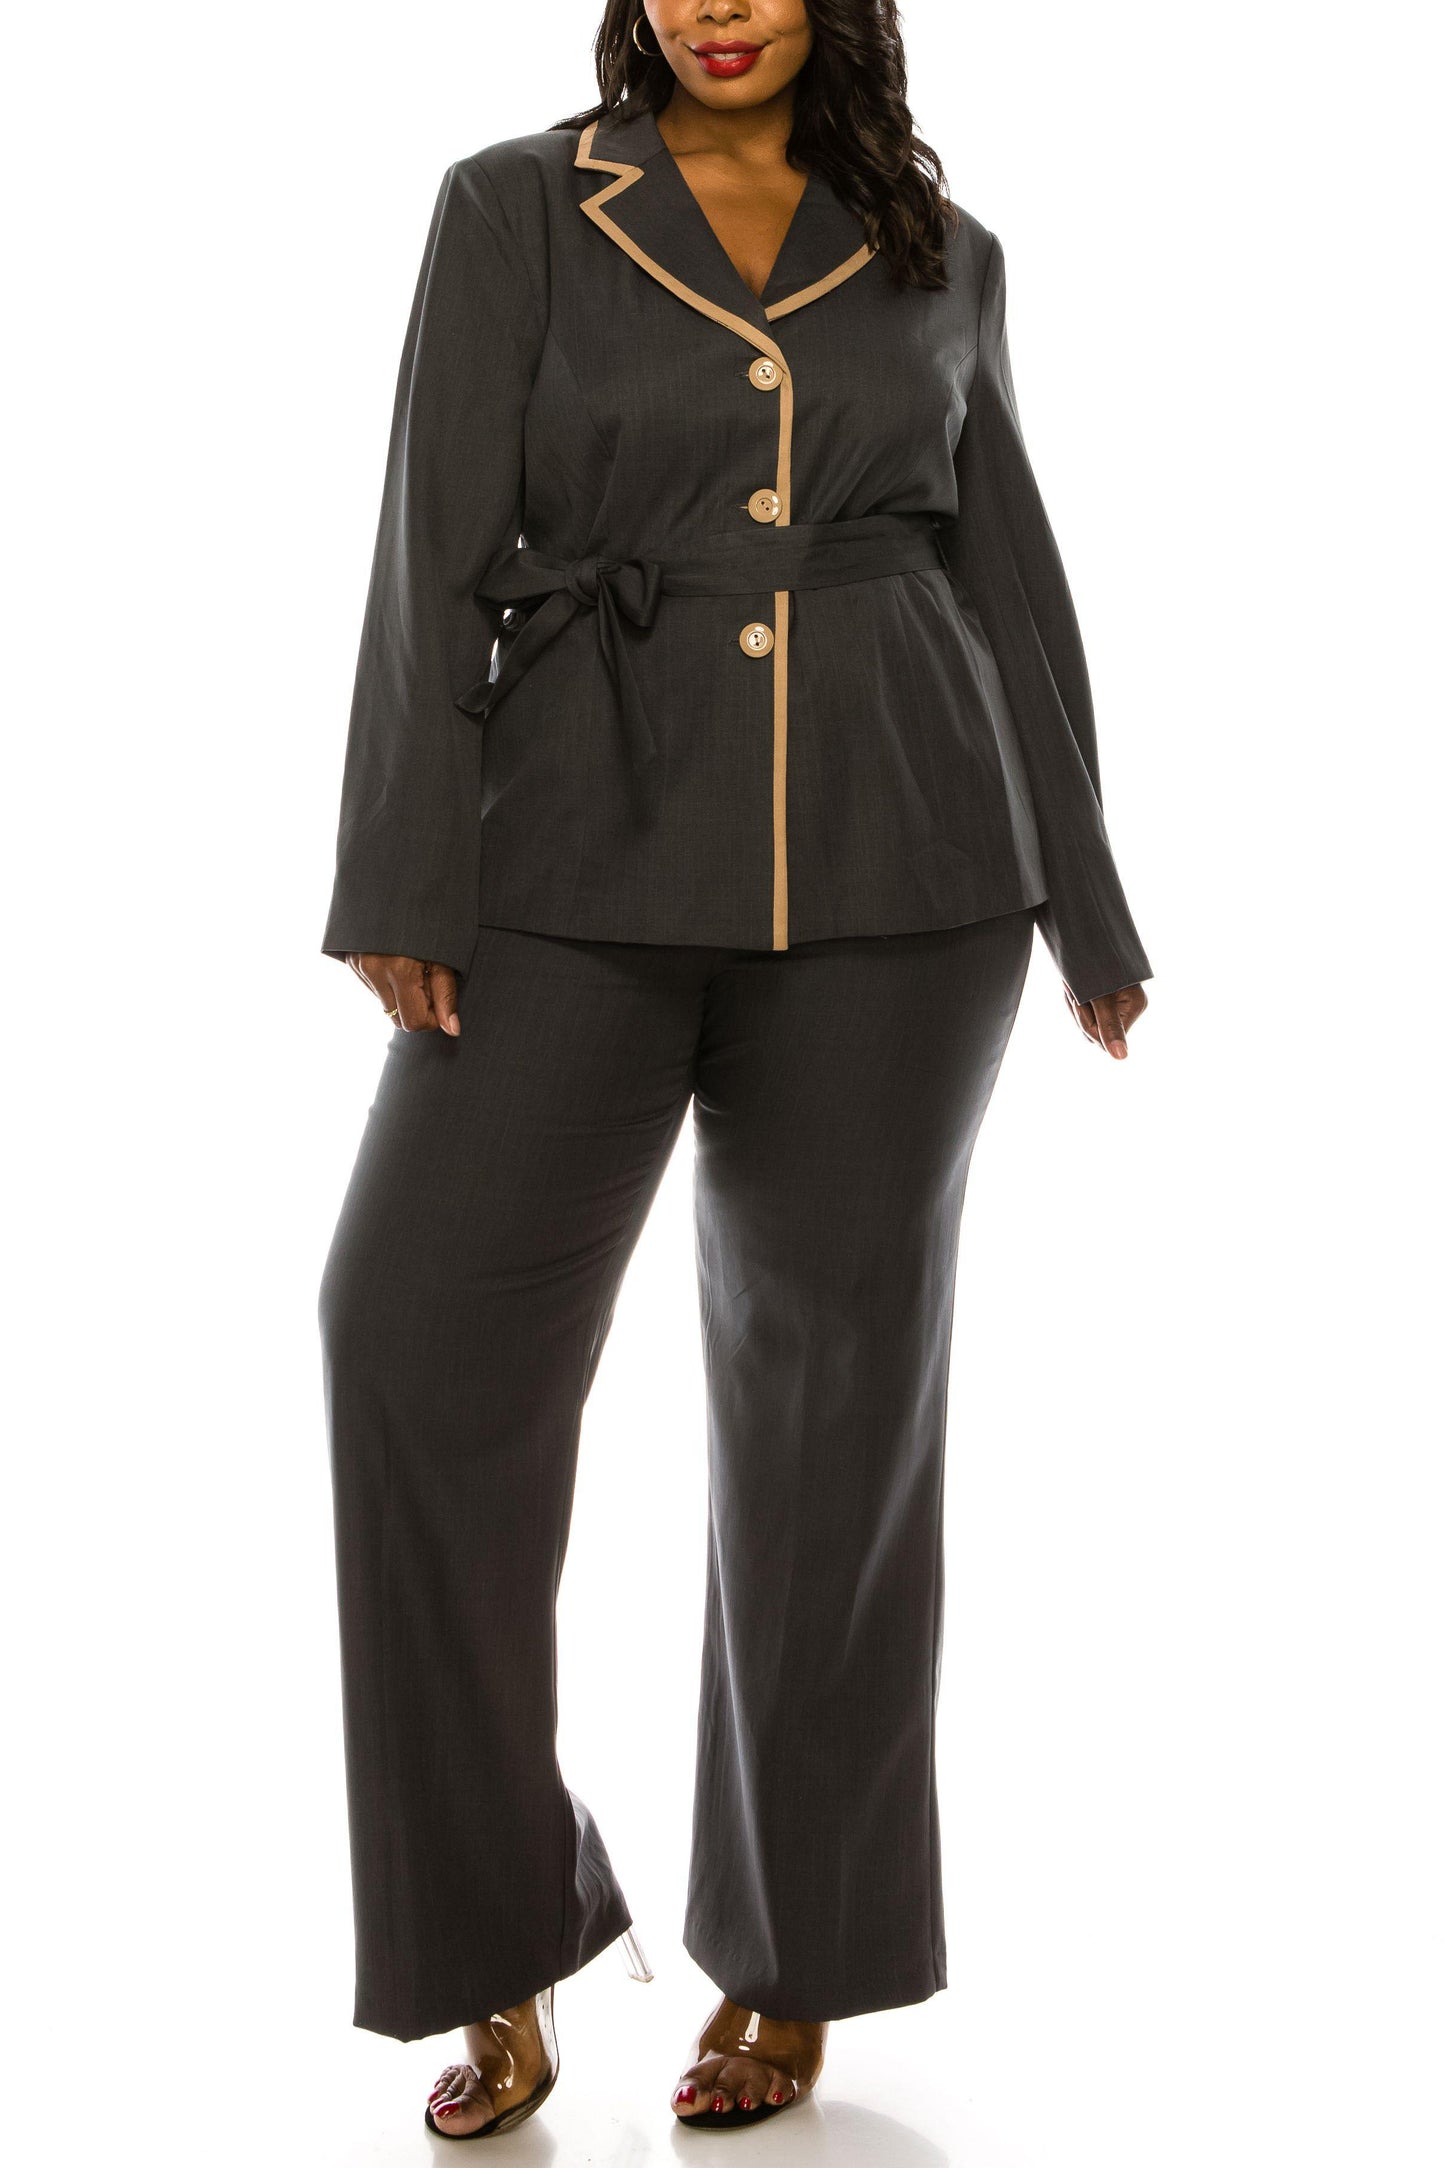 Danillo Formal Mother of the Bride Pant Suit 322186 - The Dress Outlet